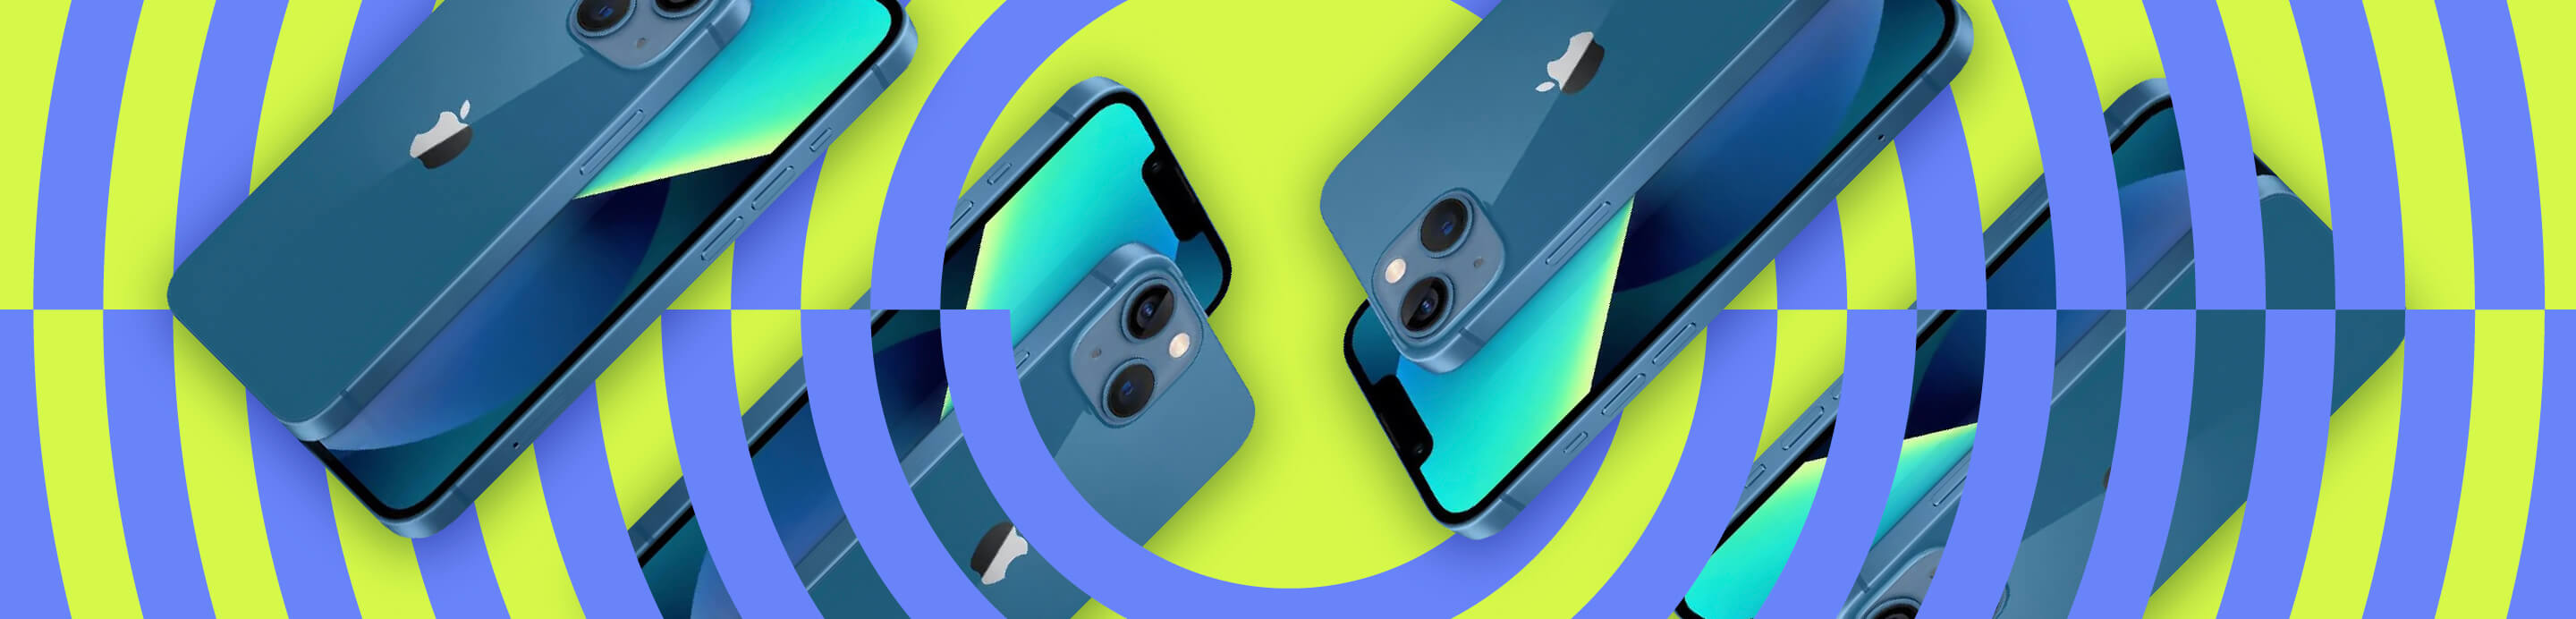 A graphic of eight blue iPhones over a yellow and blue spiral background.